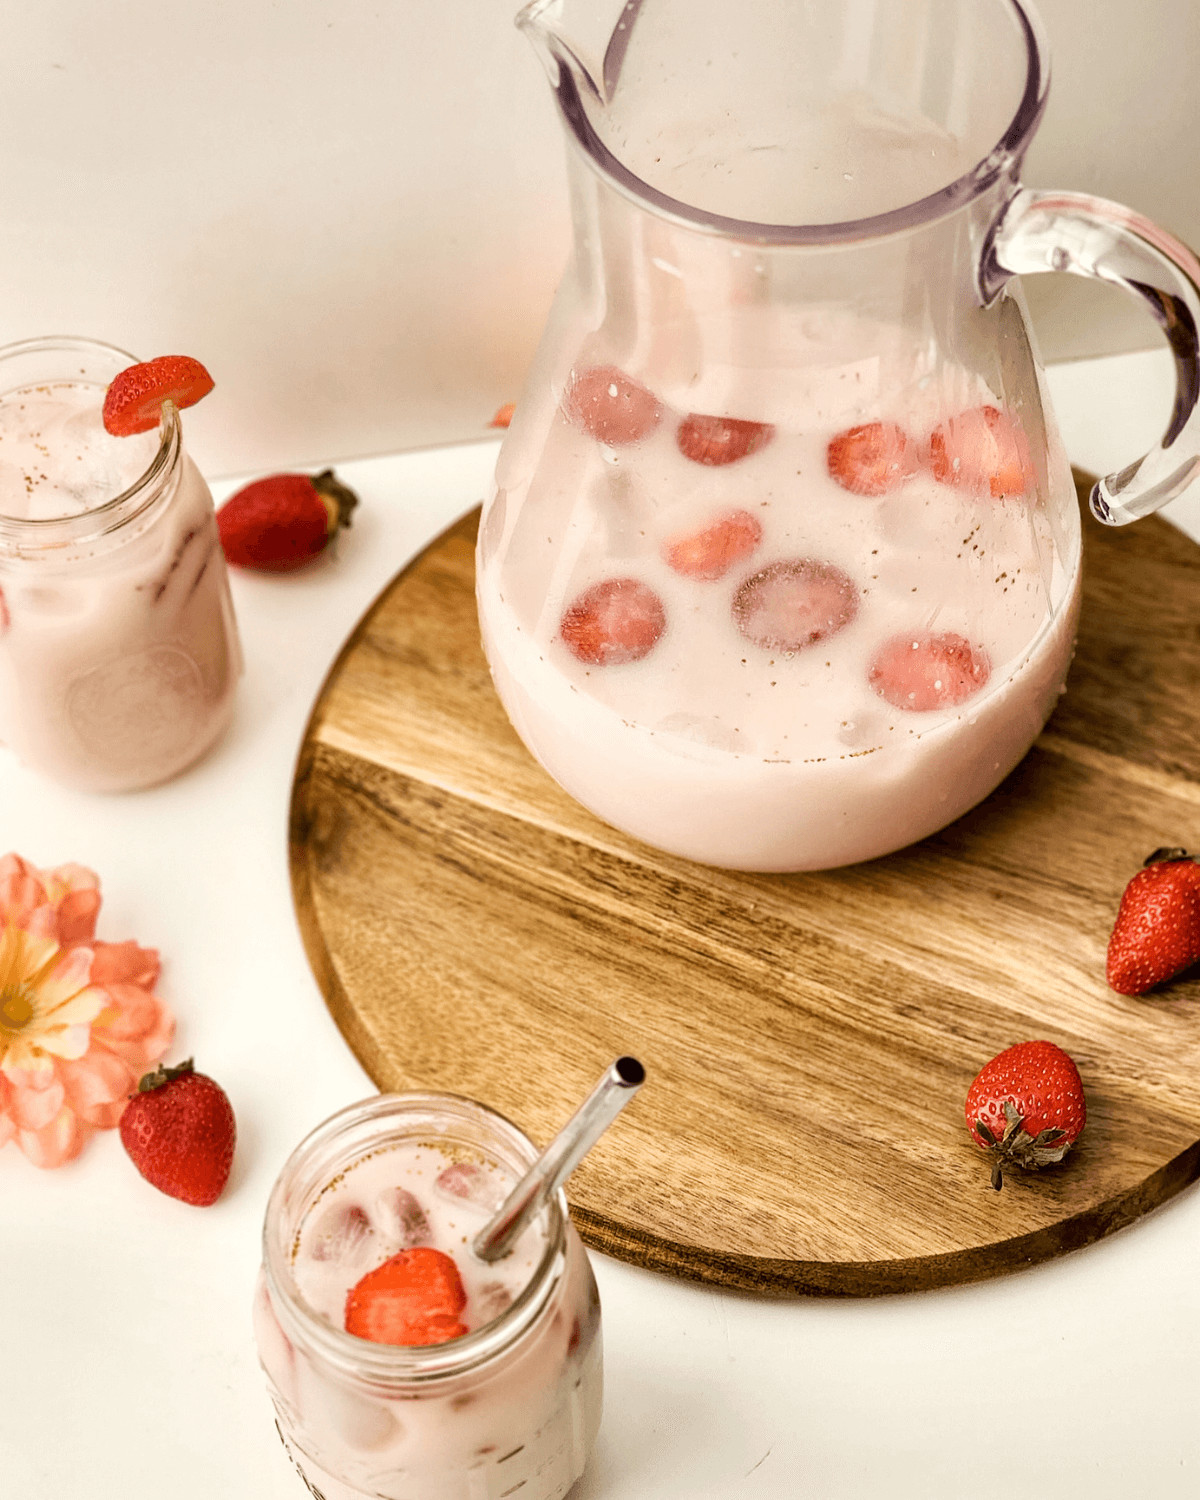 A pitcher and glasses of the finished drink with strawberries.